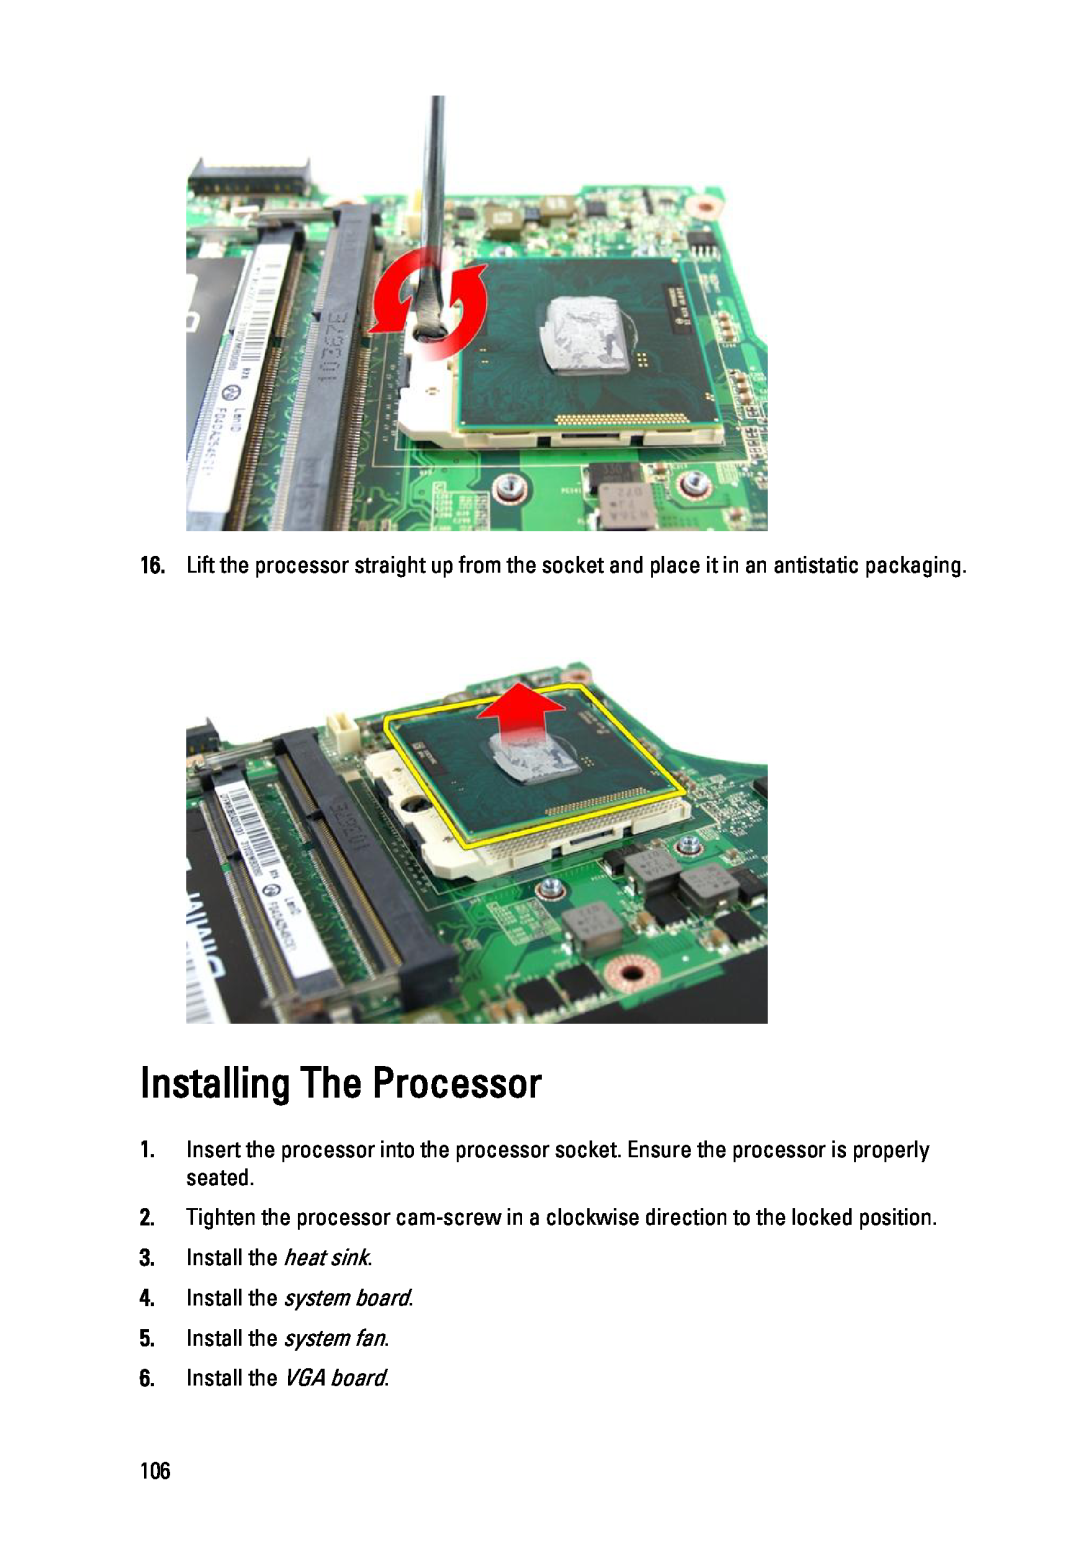 Dell 3450 owner manual Installing The Processor, Install the heat sink 4. Install the system board 